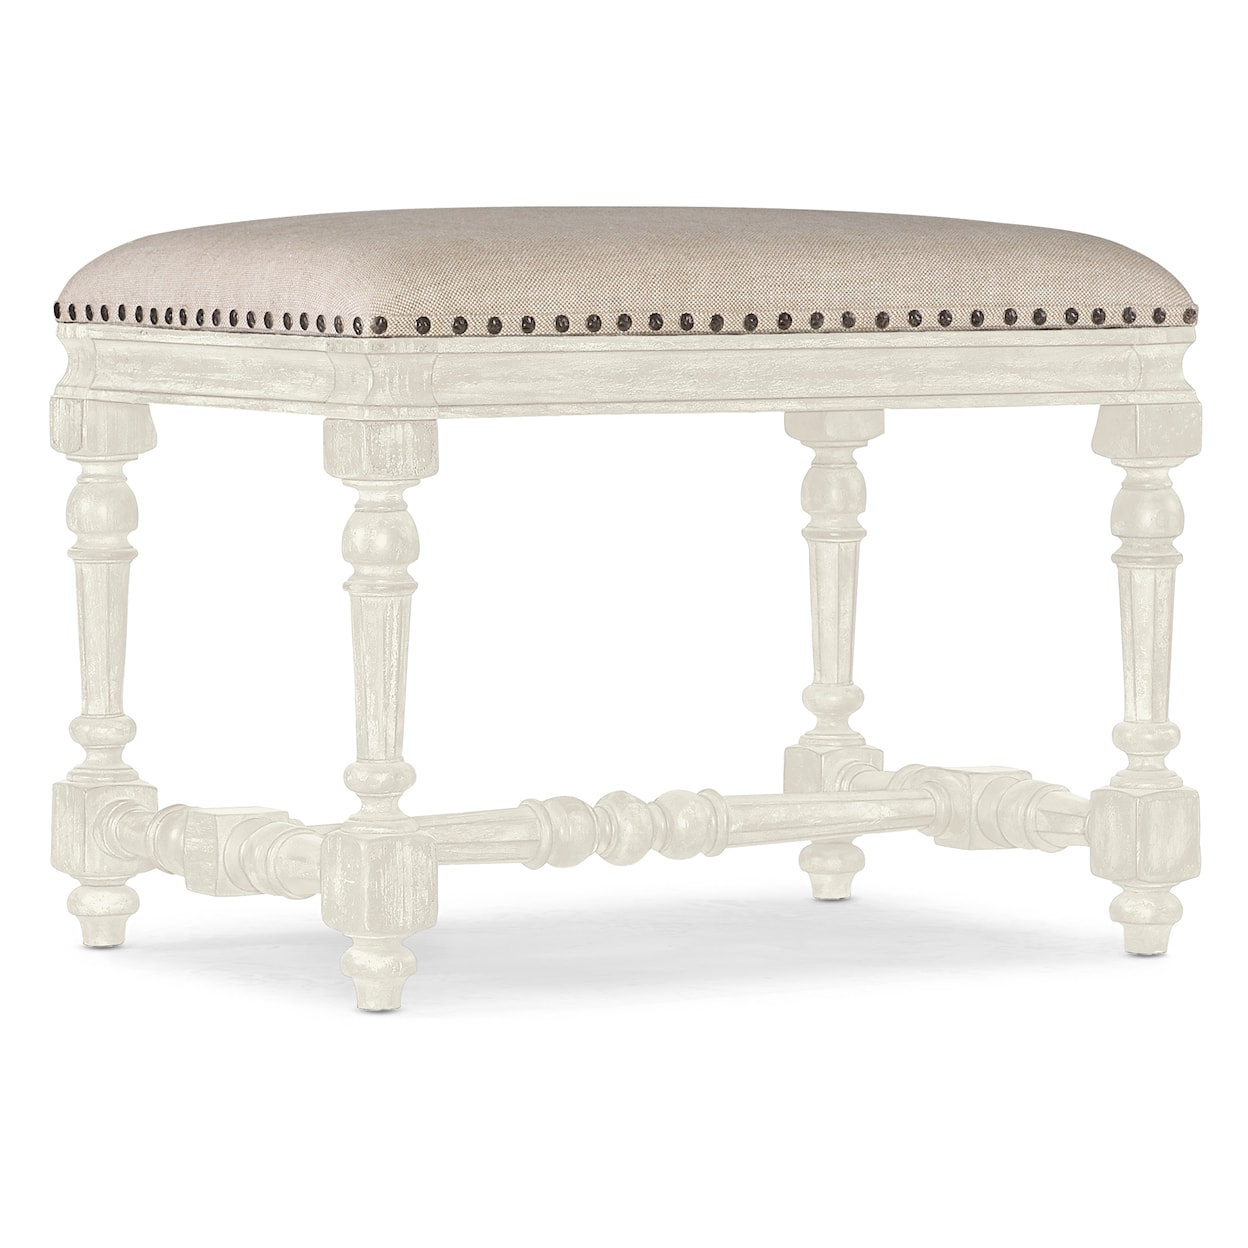 Hooker Furniture Traditions Bed Bench